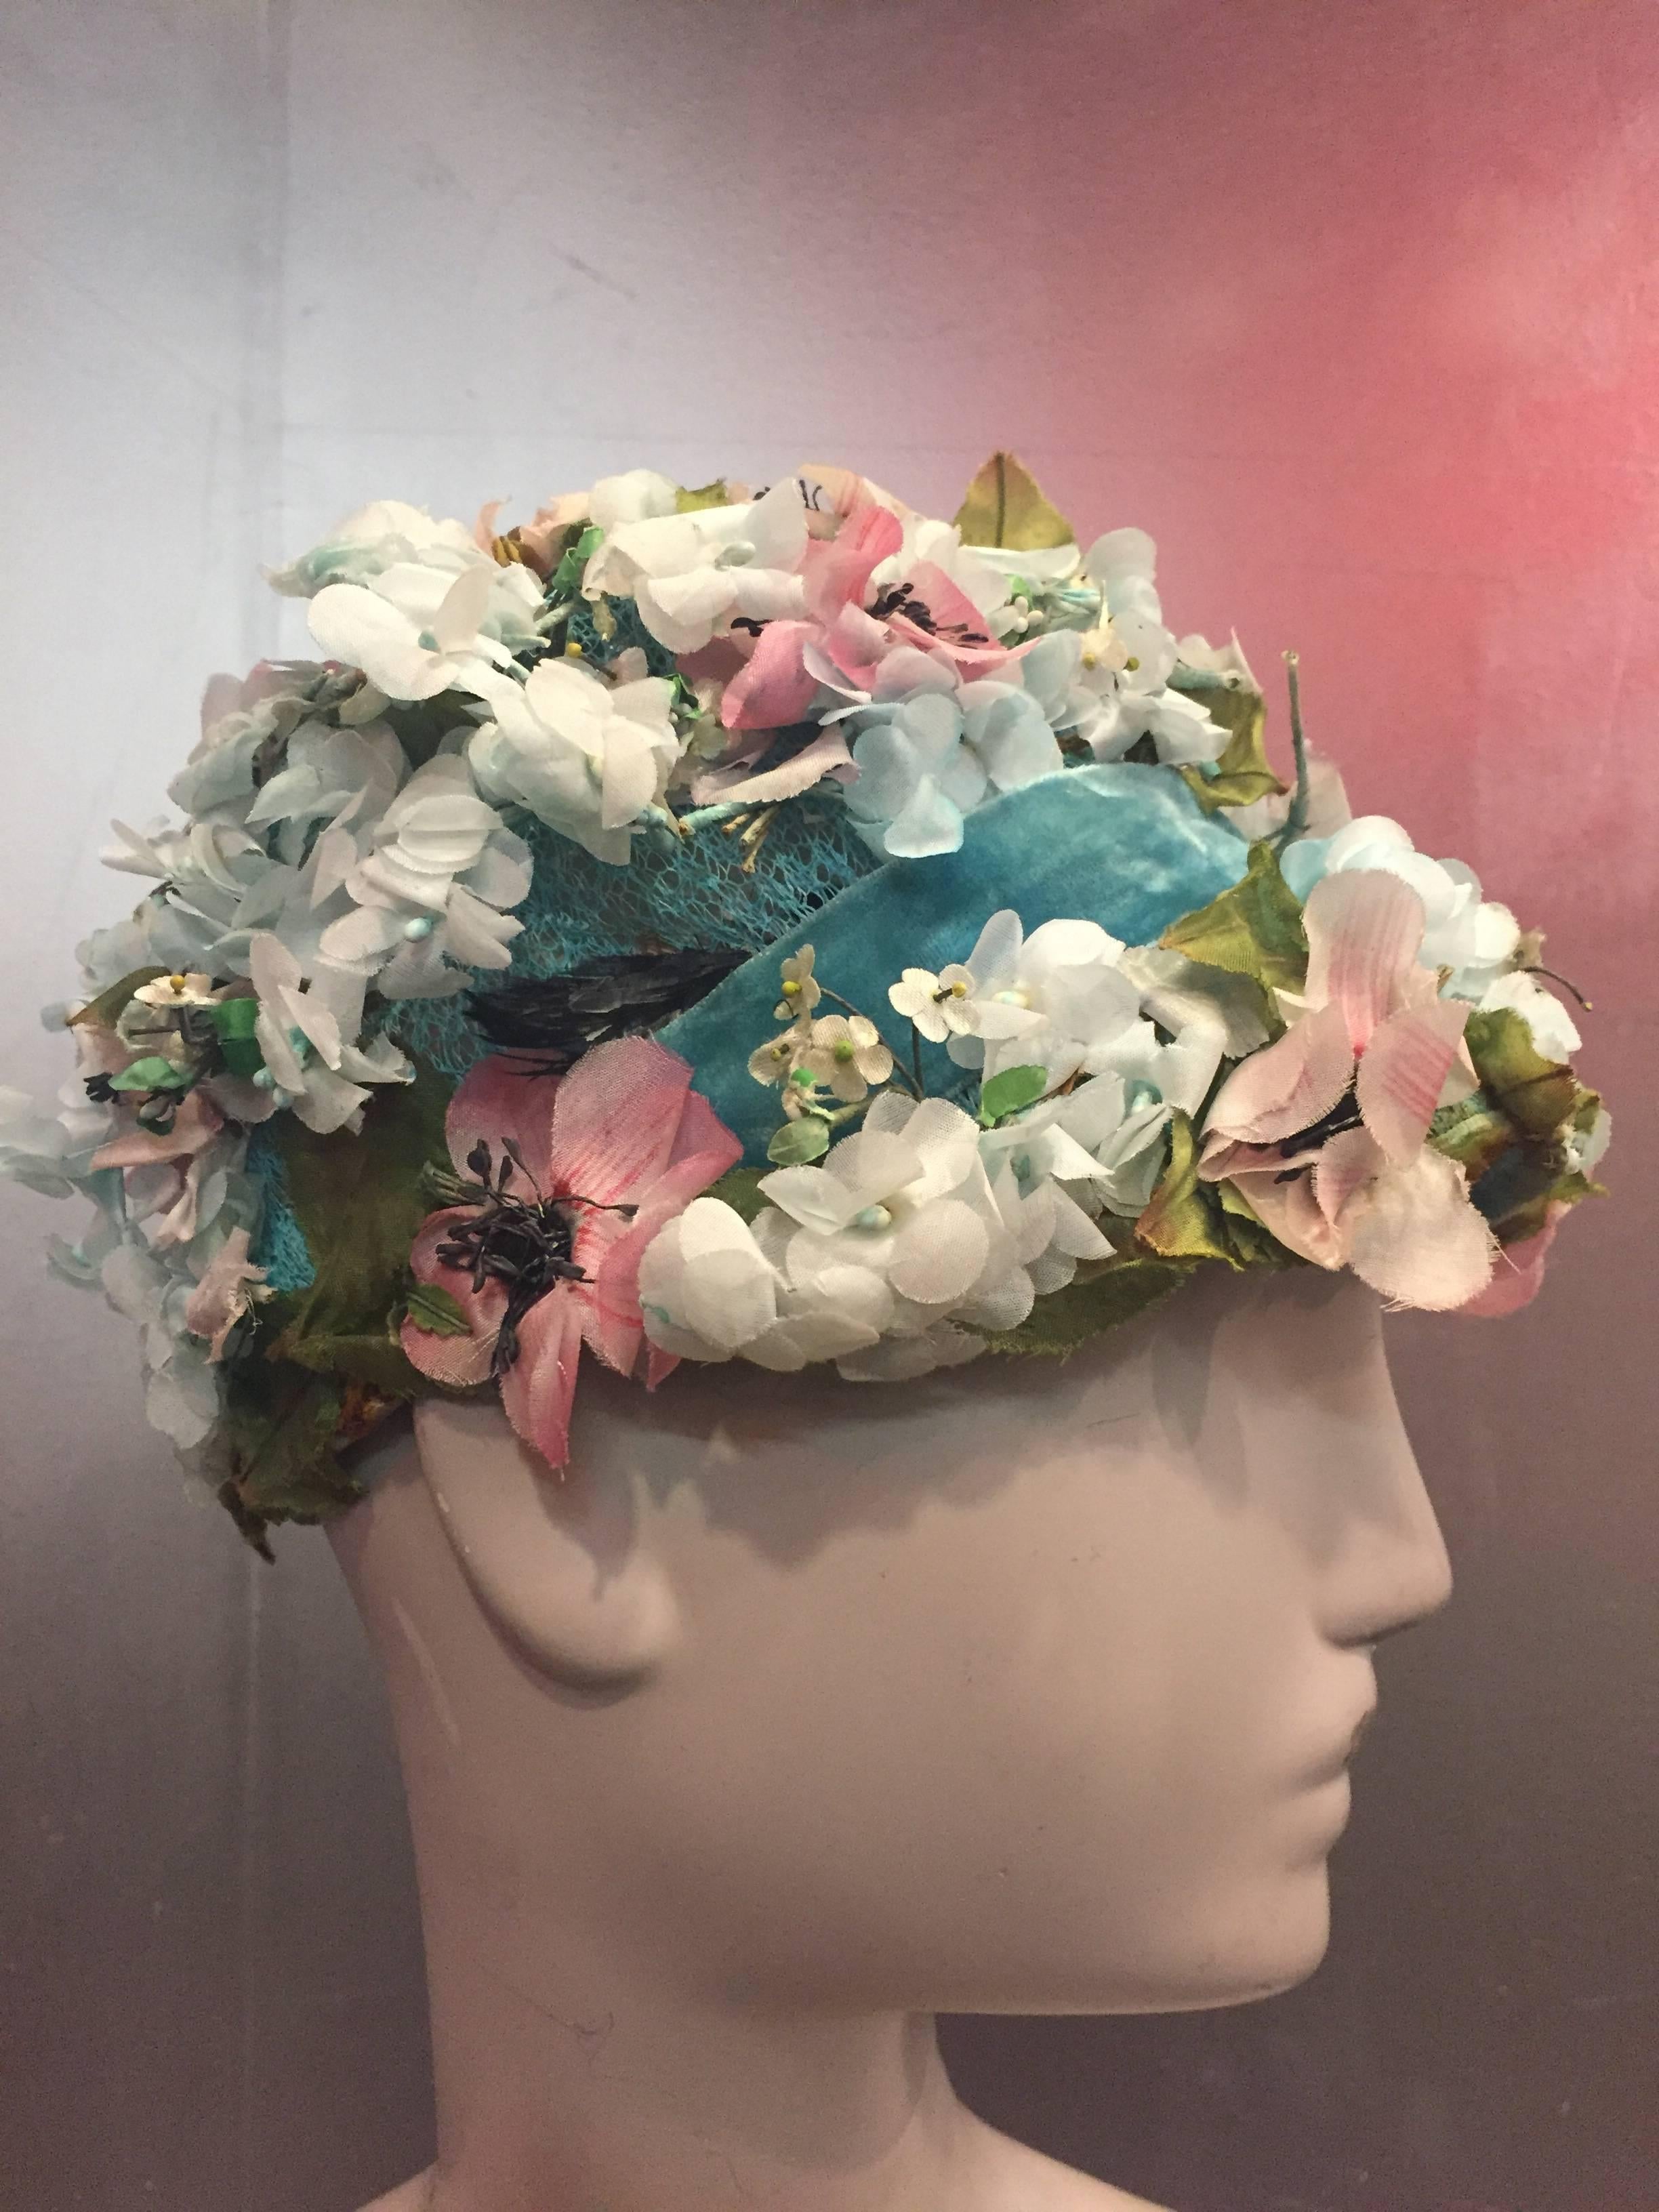 This is a fabulously constructed green net hat, banded in green velvet with a profusion of small, medium and large white silk flowers. To add to the intricacy, each flower type has a different colored stamen. This adds little dots of white, blush,